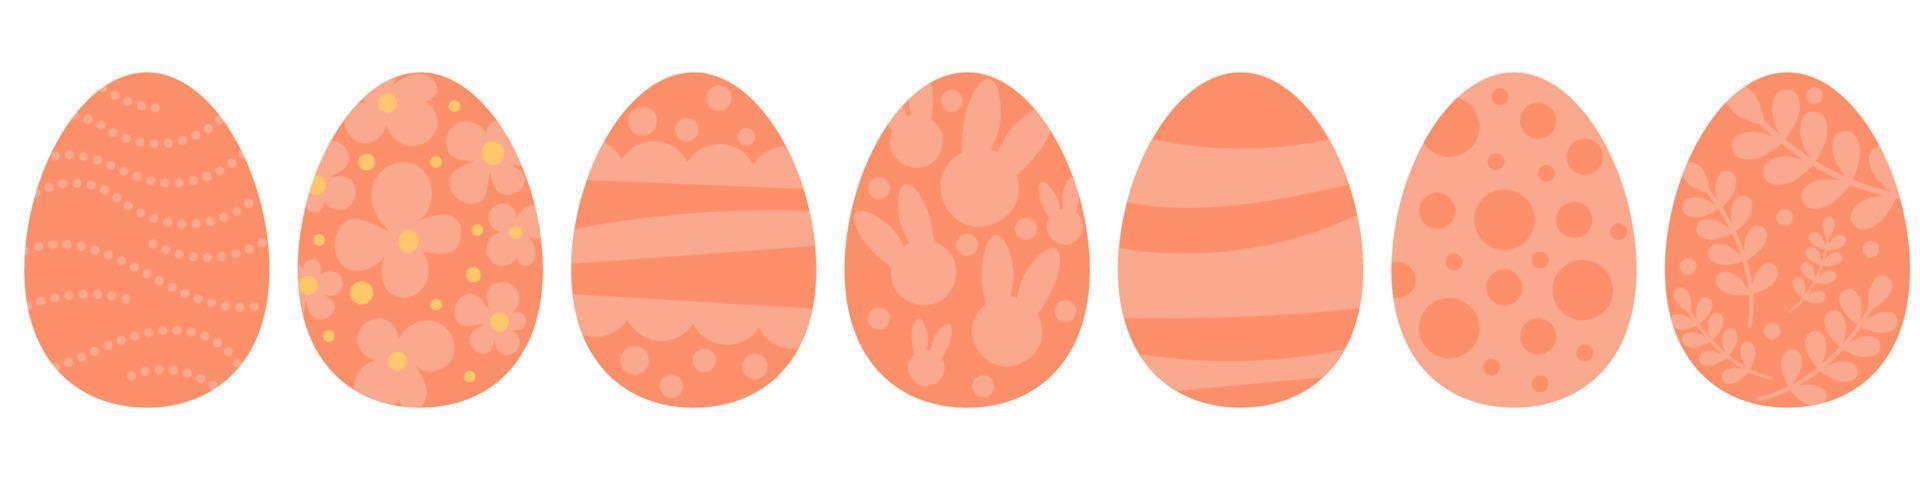 Set of Easter eggs. Traditional food for celebration. Ellipse shape pack of elements. Easter hunt decoration. Colorful group of Easter symbols. Isolated on white background. For promotion, printing. vector